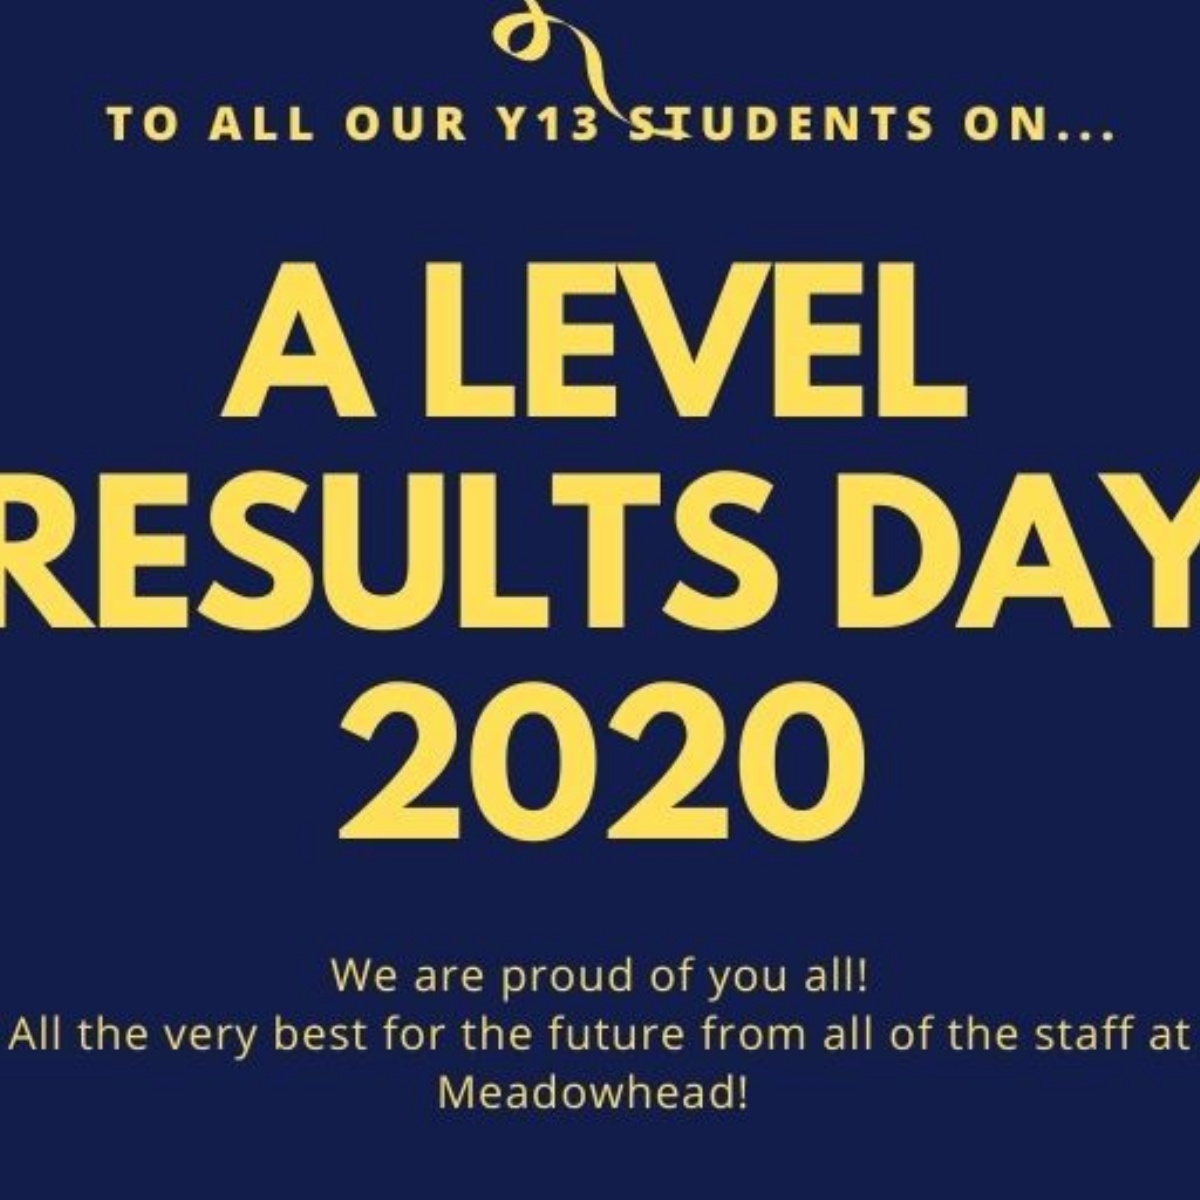 A Level results day 2020 Meadowhead School